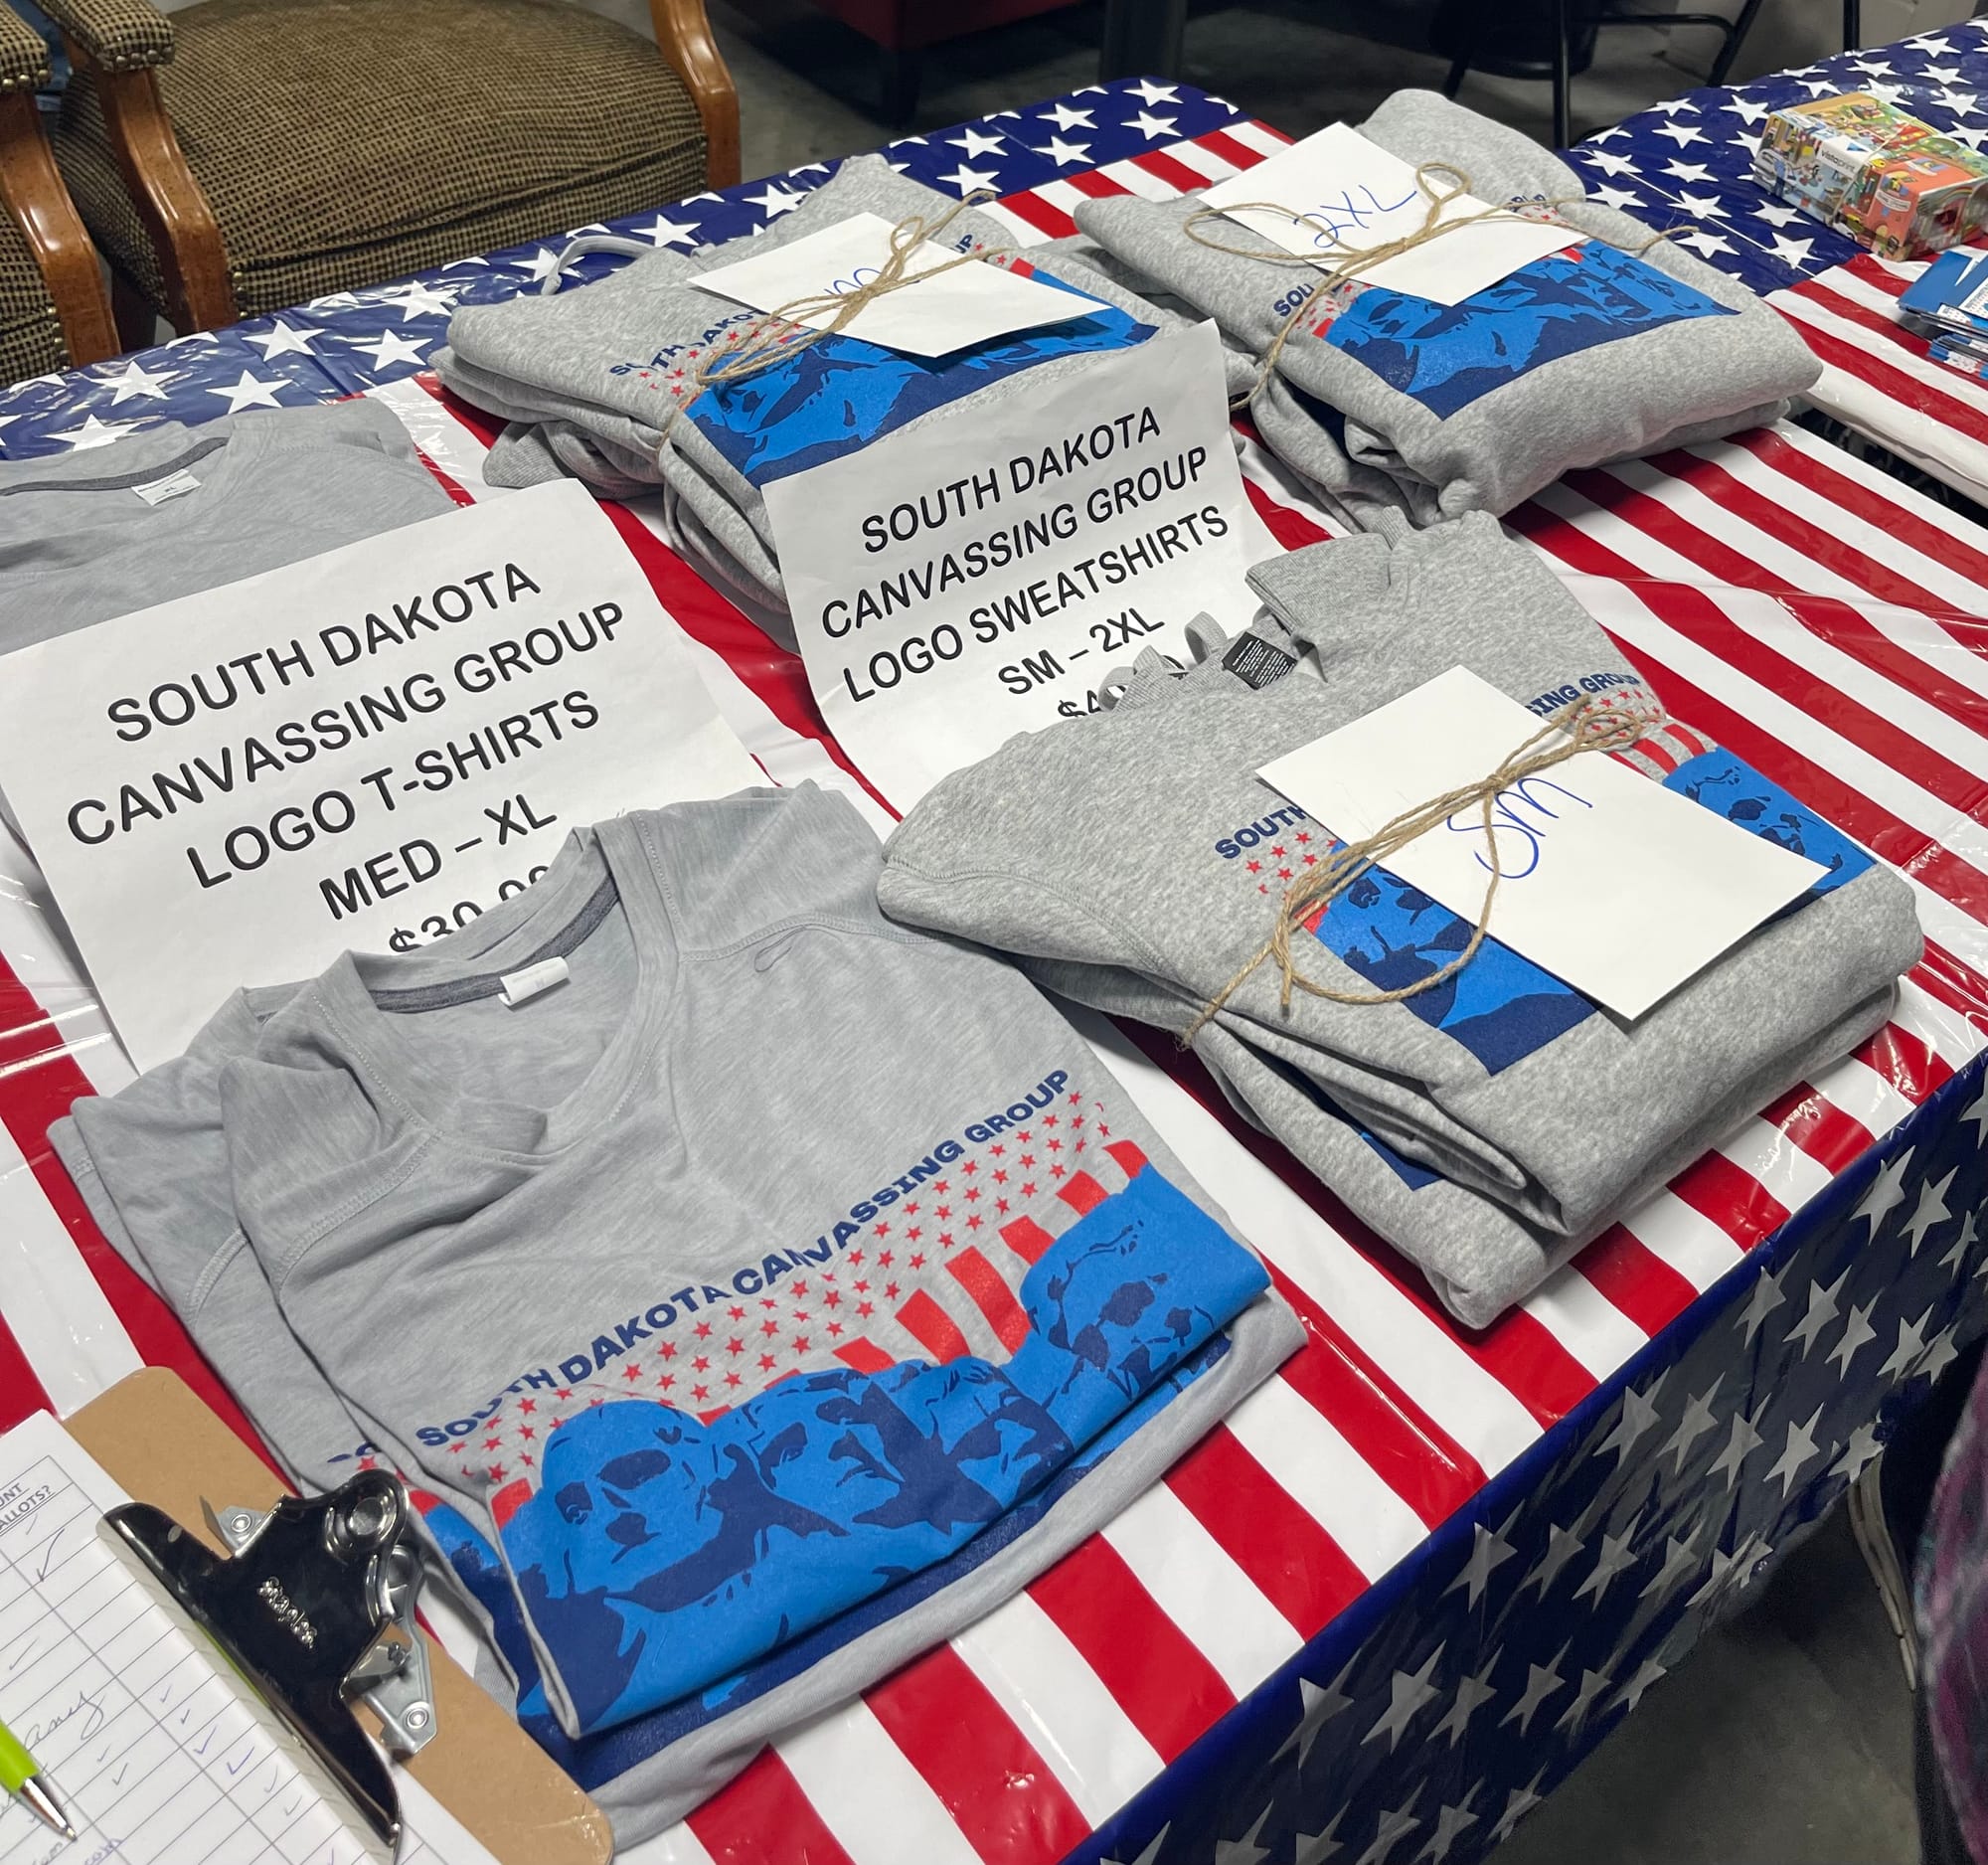 South Dakota Canvassing Group T-shirts are shown on a table